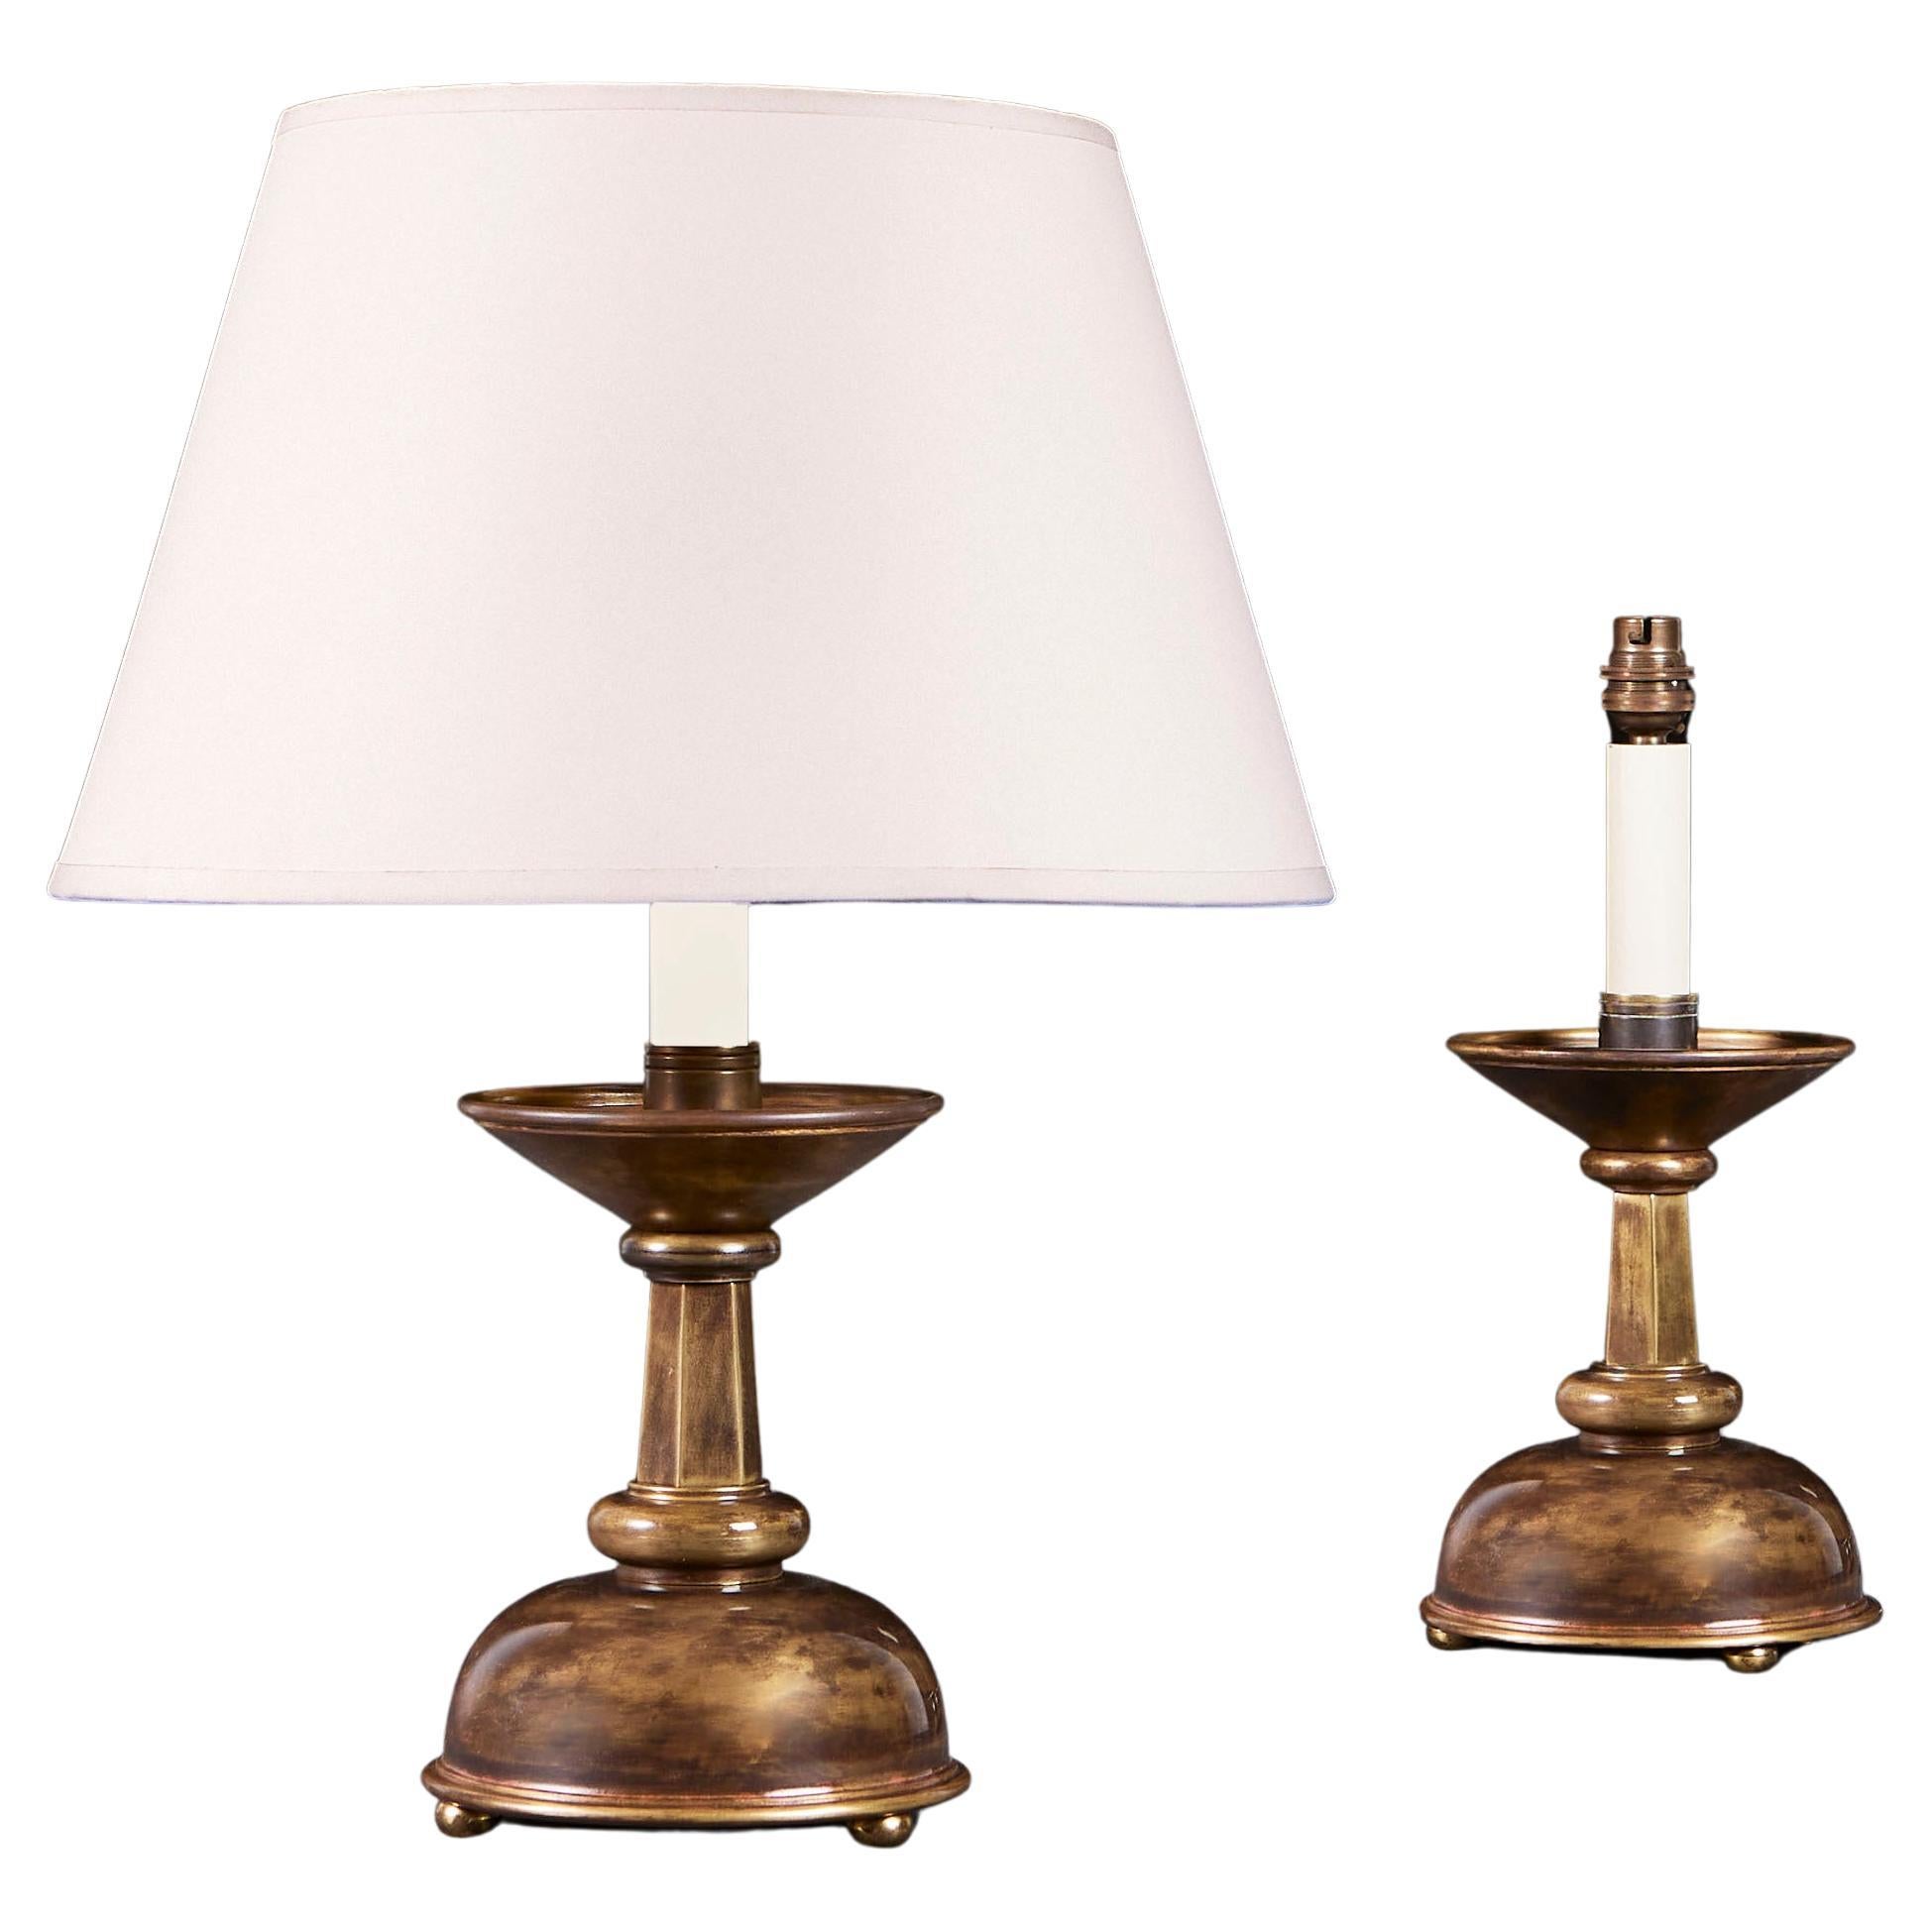 A Pair of Brass Arts and Crafts Table Lamps